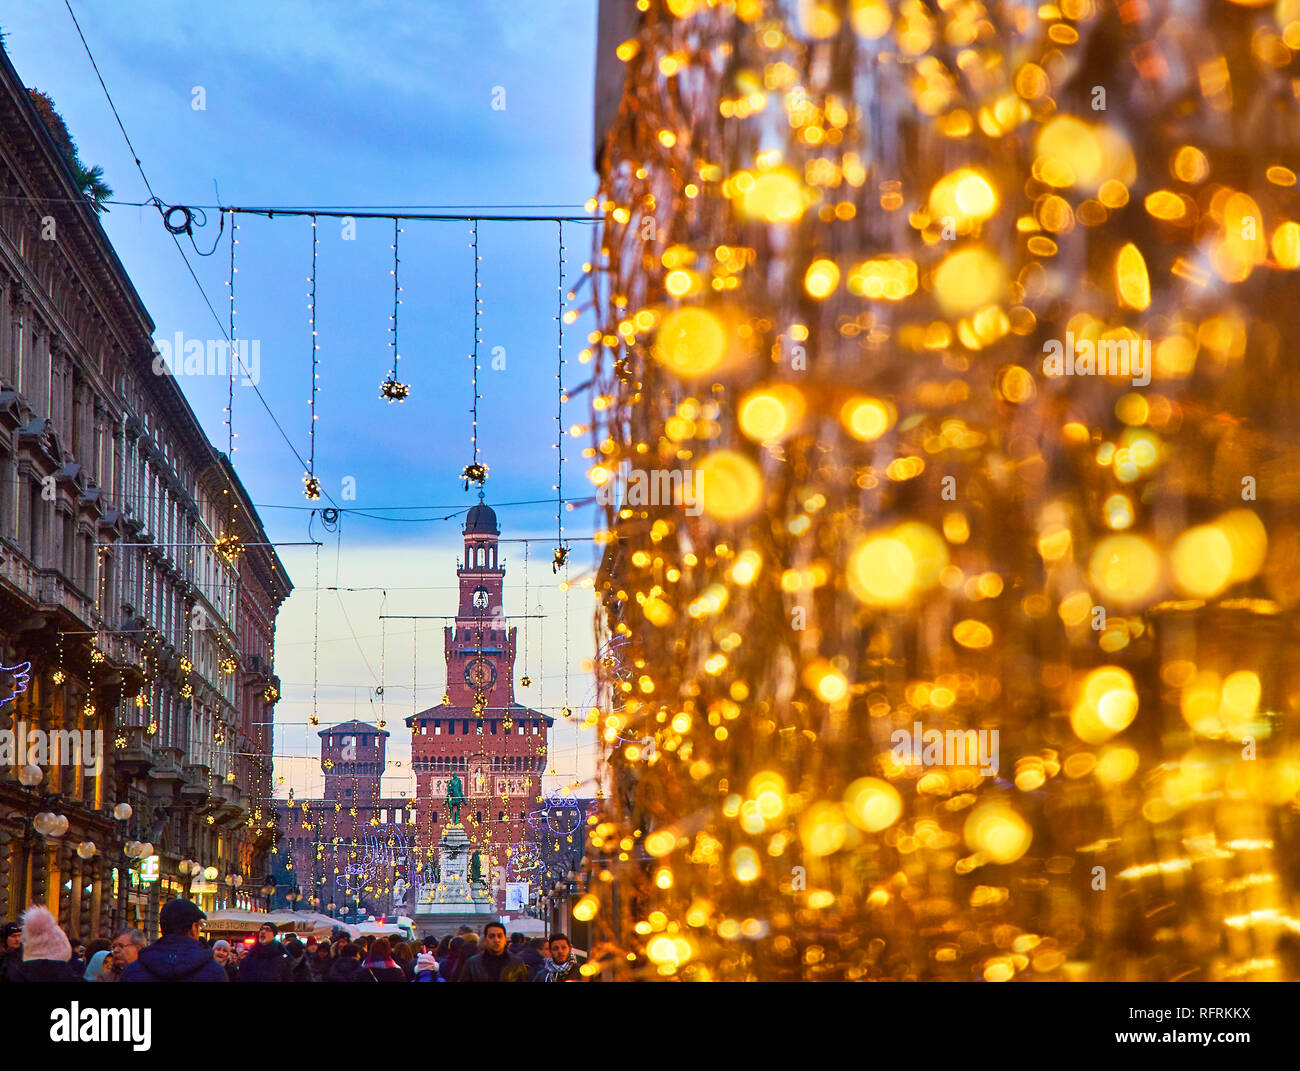 People walking on Via Dante street illuminated by christmas lights at nightfall with the Filarete Tower of the Castello Sforzesco in background. Milan Stock Photo